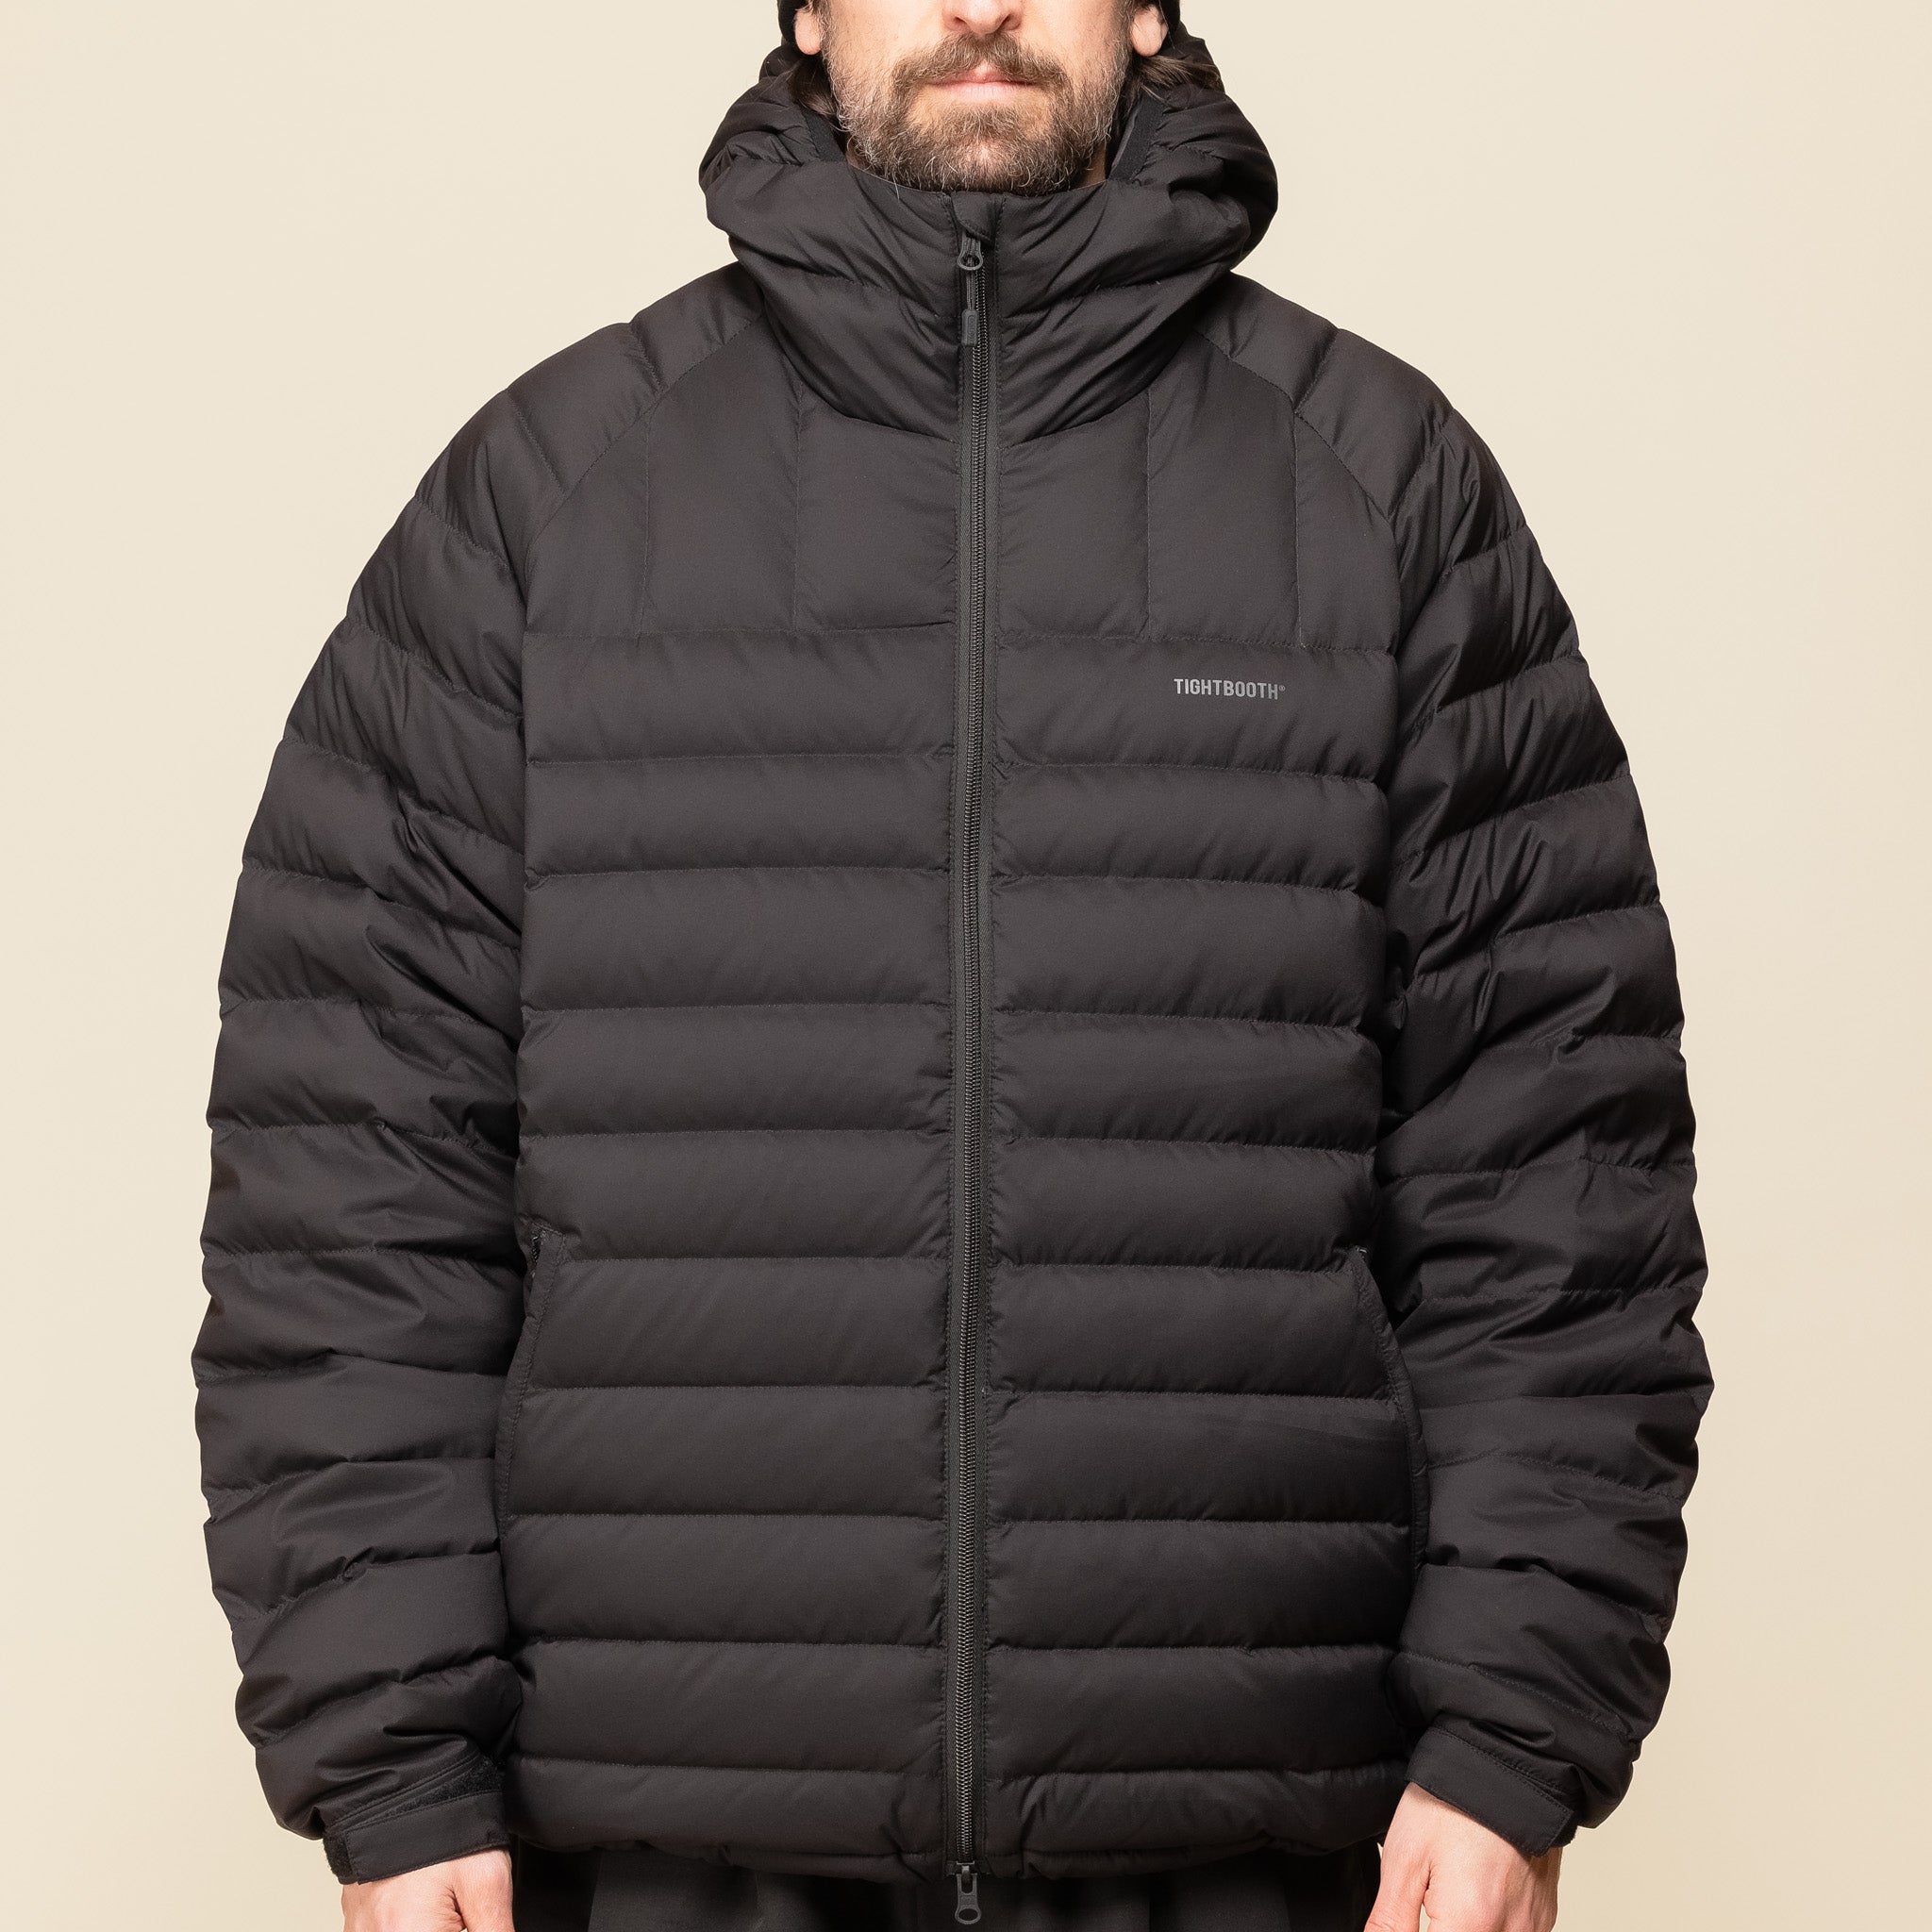 Tightbooth - Light Down Jacket - Black "tightbooth stockists" "tightbooth Japan"